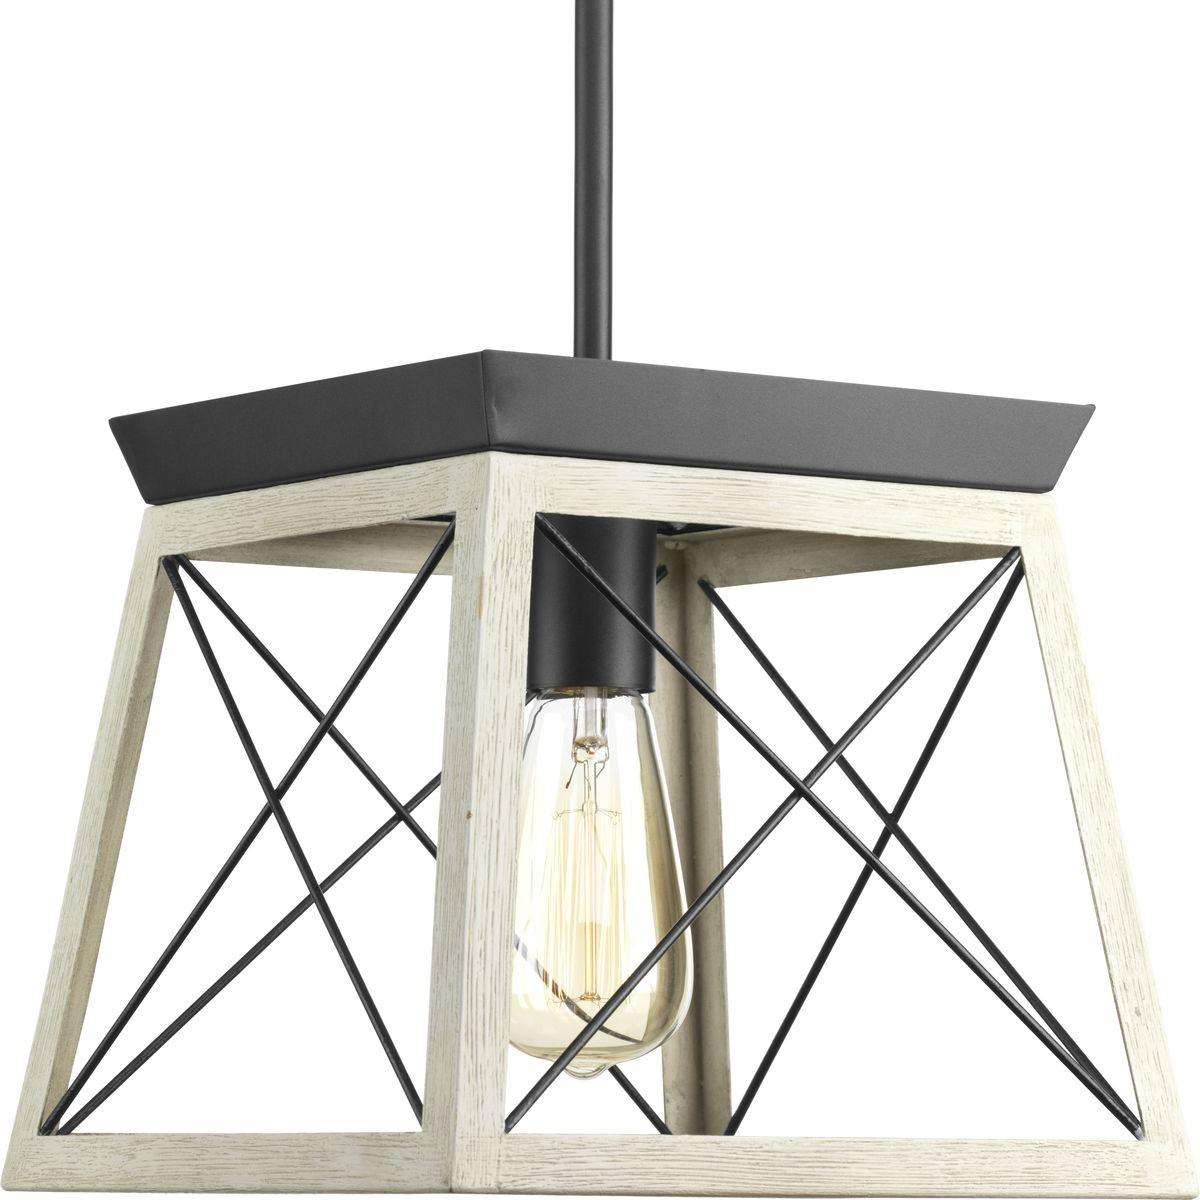 Hubbell P500041-143 The Briarwood collection features a classic pattern commonly found on barn or farmhouse doors and gates. The simple geometric form features a faux-painted wood enclosure to frame vintage-style light bulbs. A coastal-inspired whitewashed finish paired with